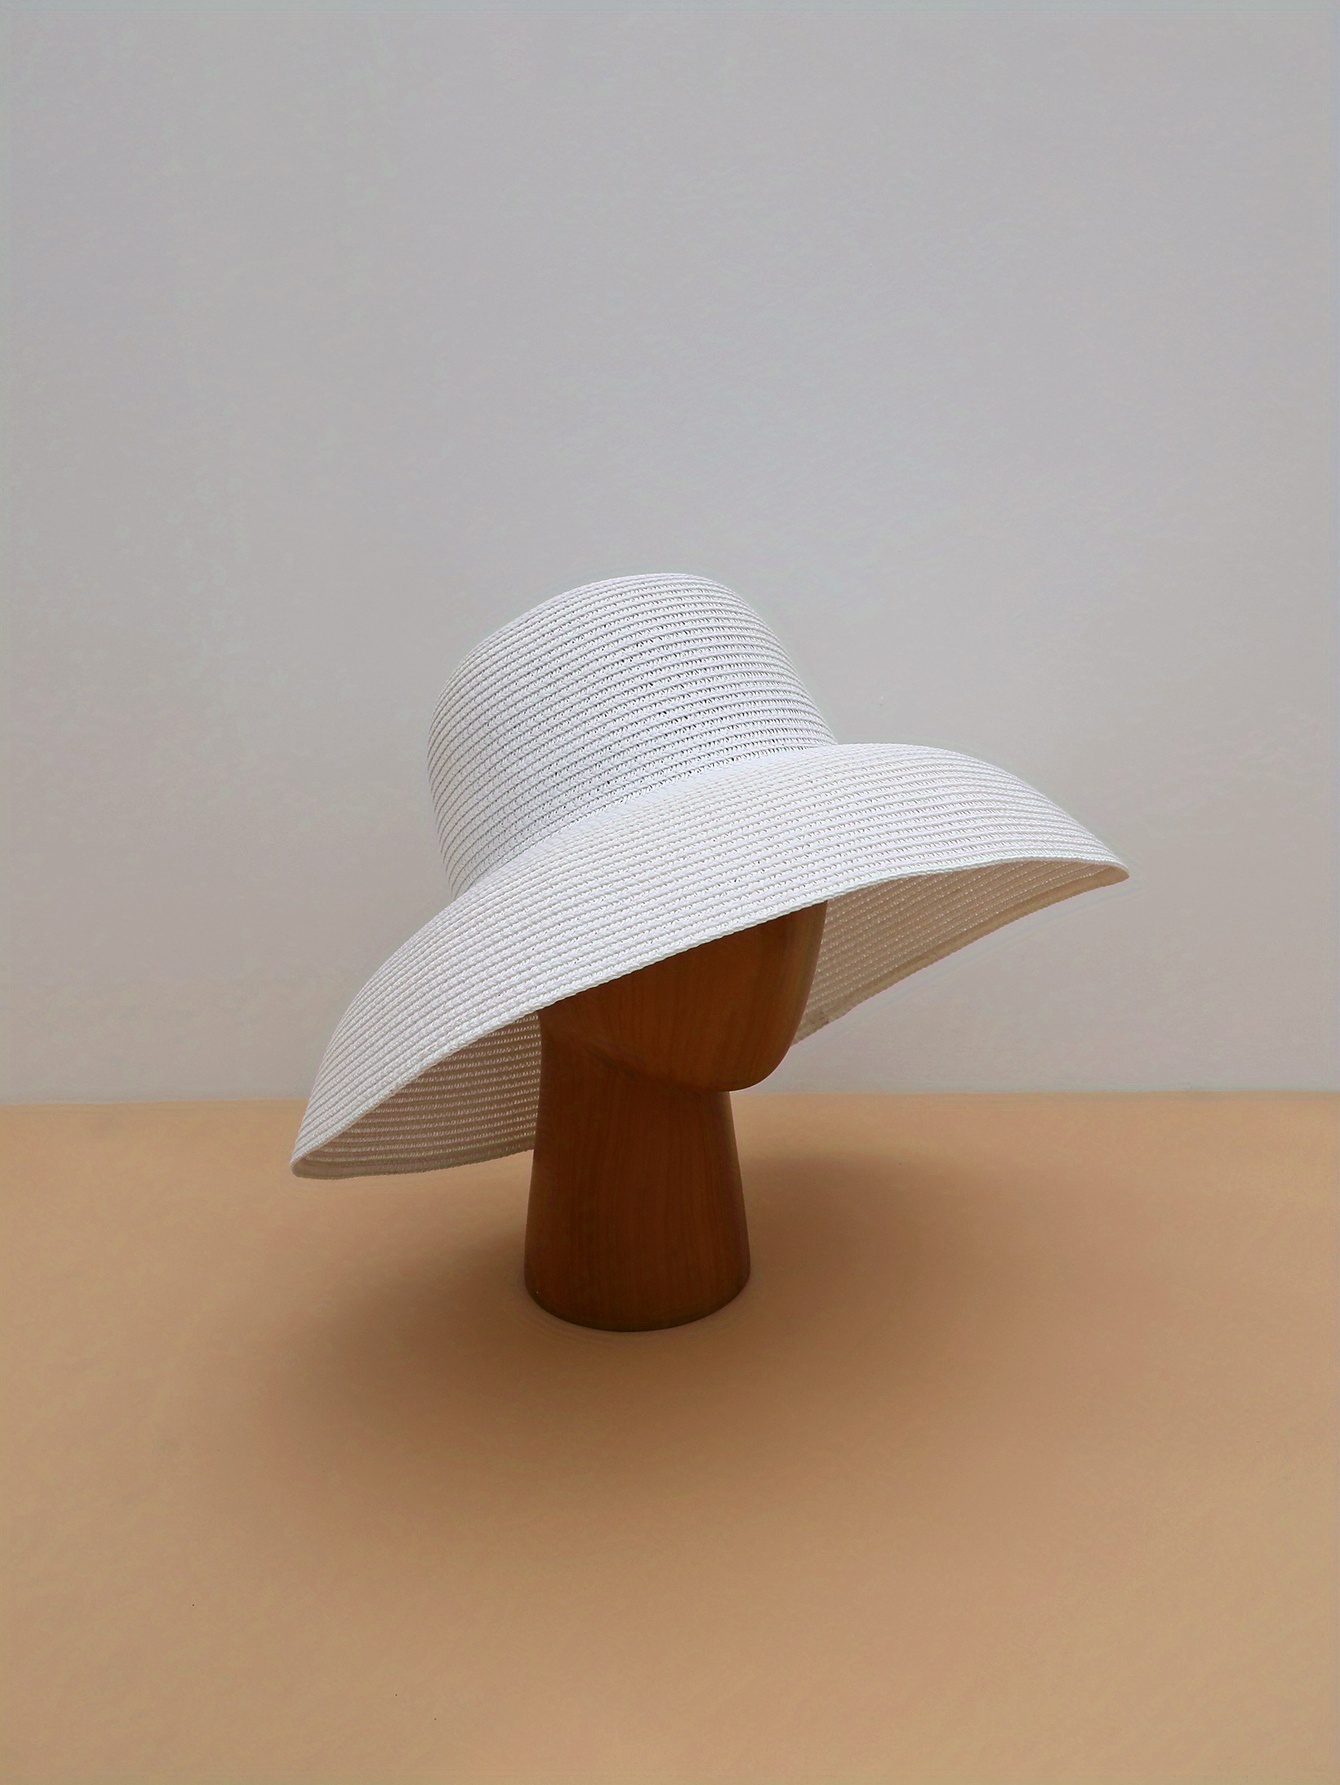 French Style Vintage Wide Brim Bucket Hat Straw For Women Perfect For  Summer Beach Days, Sun Protection, And Outdoor Activities From Men03, $9.39